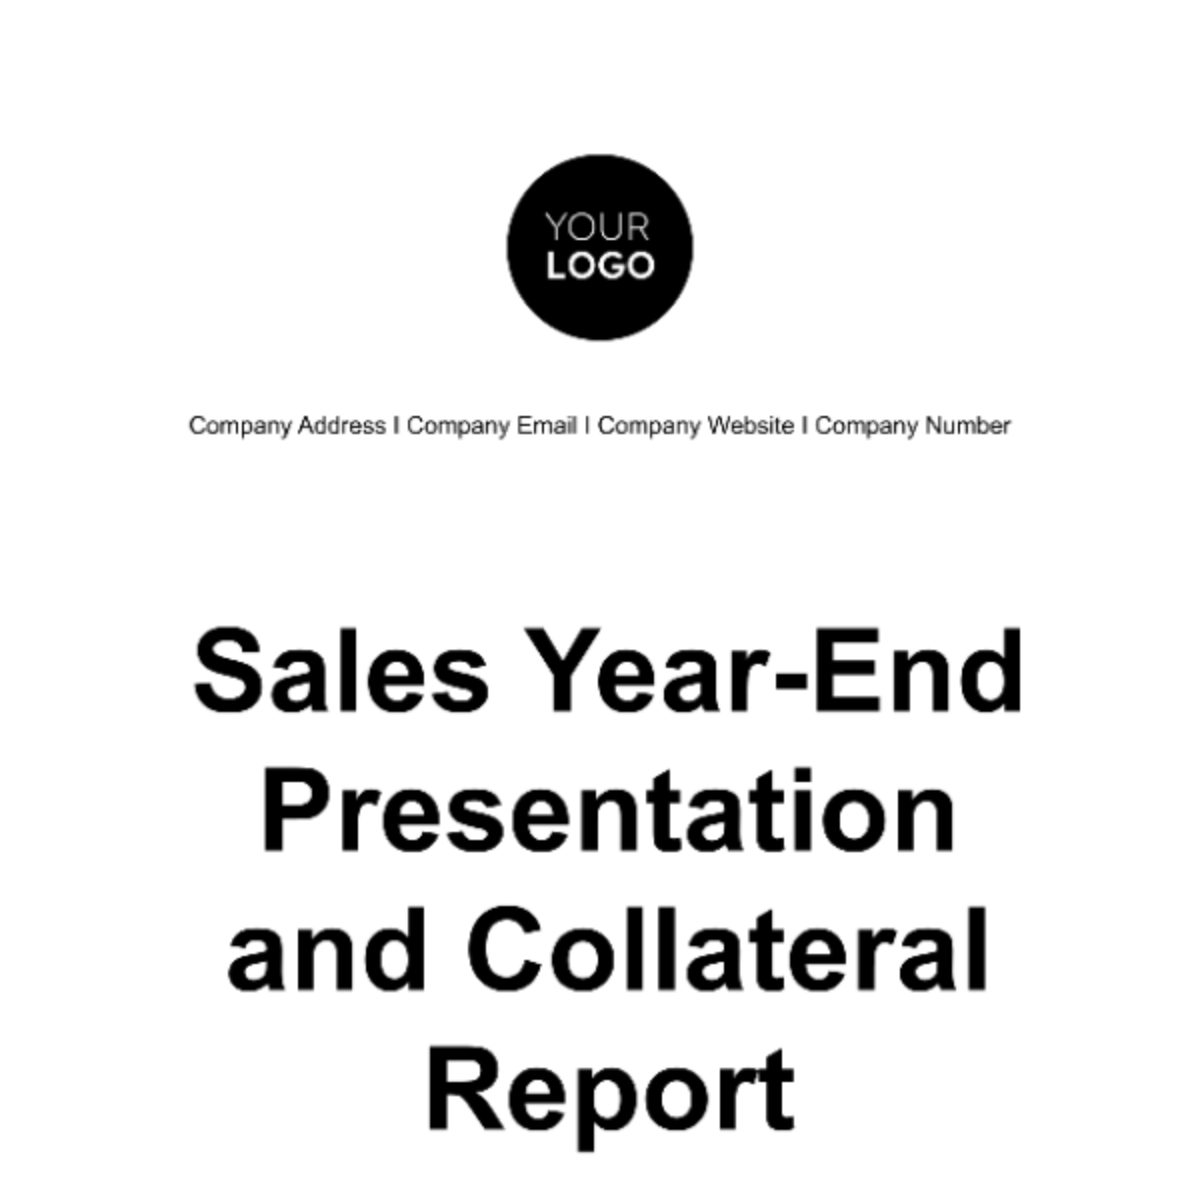 Sales Year-end Presentation and Collateral Report Template